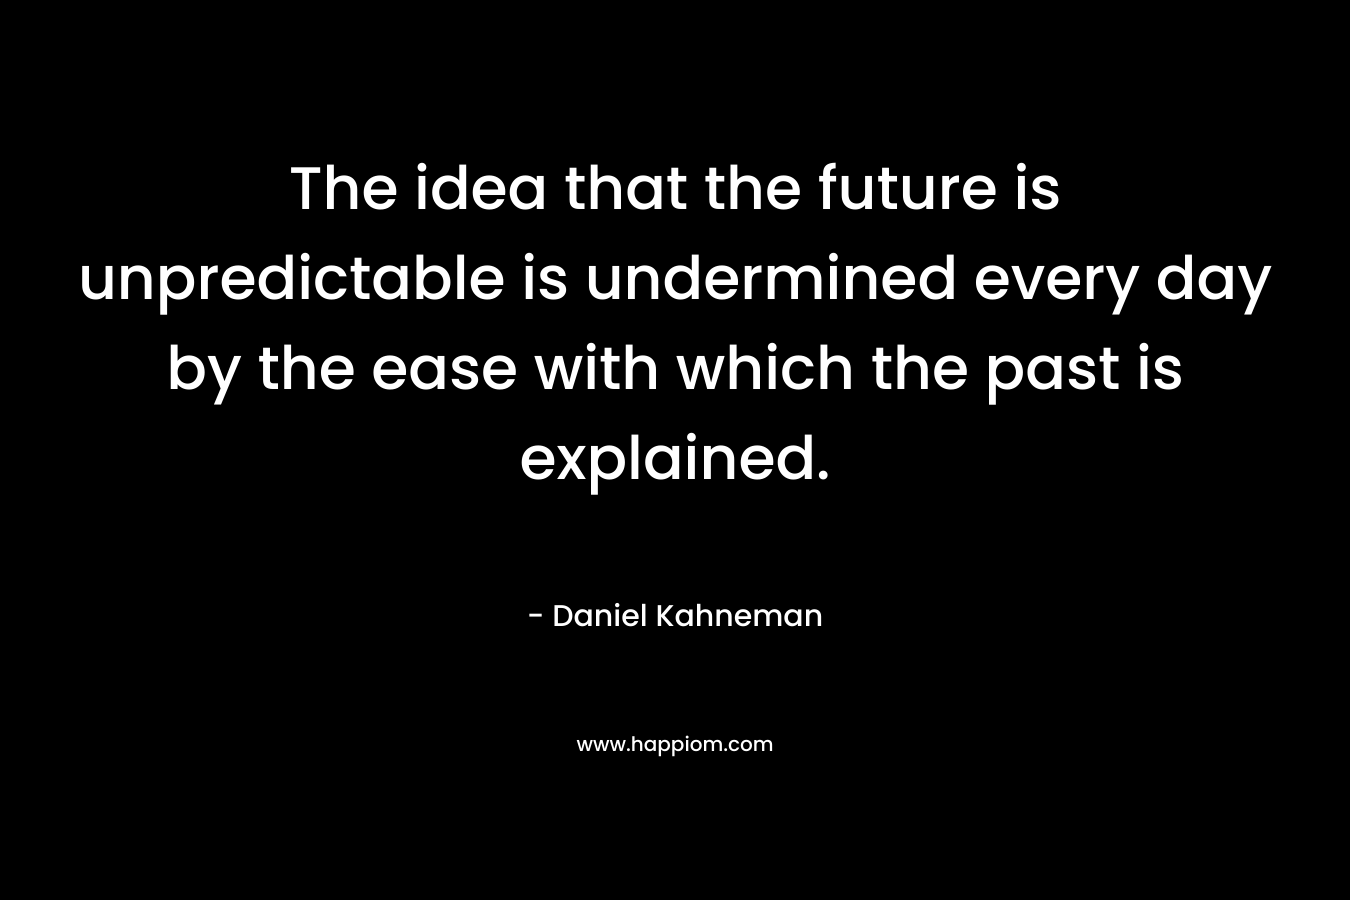 The idea that the future is unpredictable is undermined every day by the ease with which the past is explained. – Daniel Kahneman